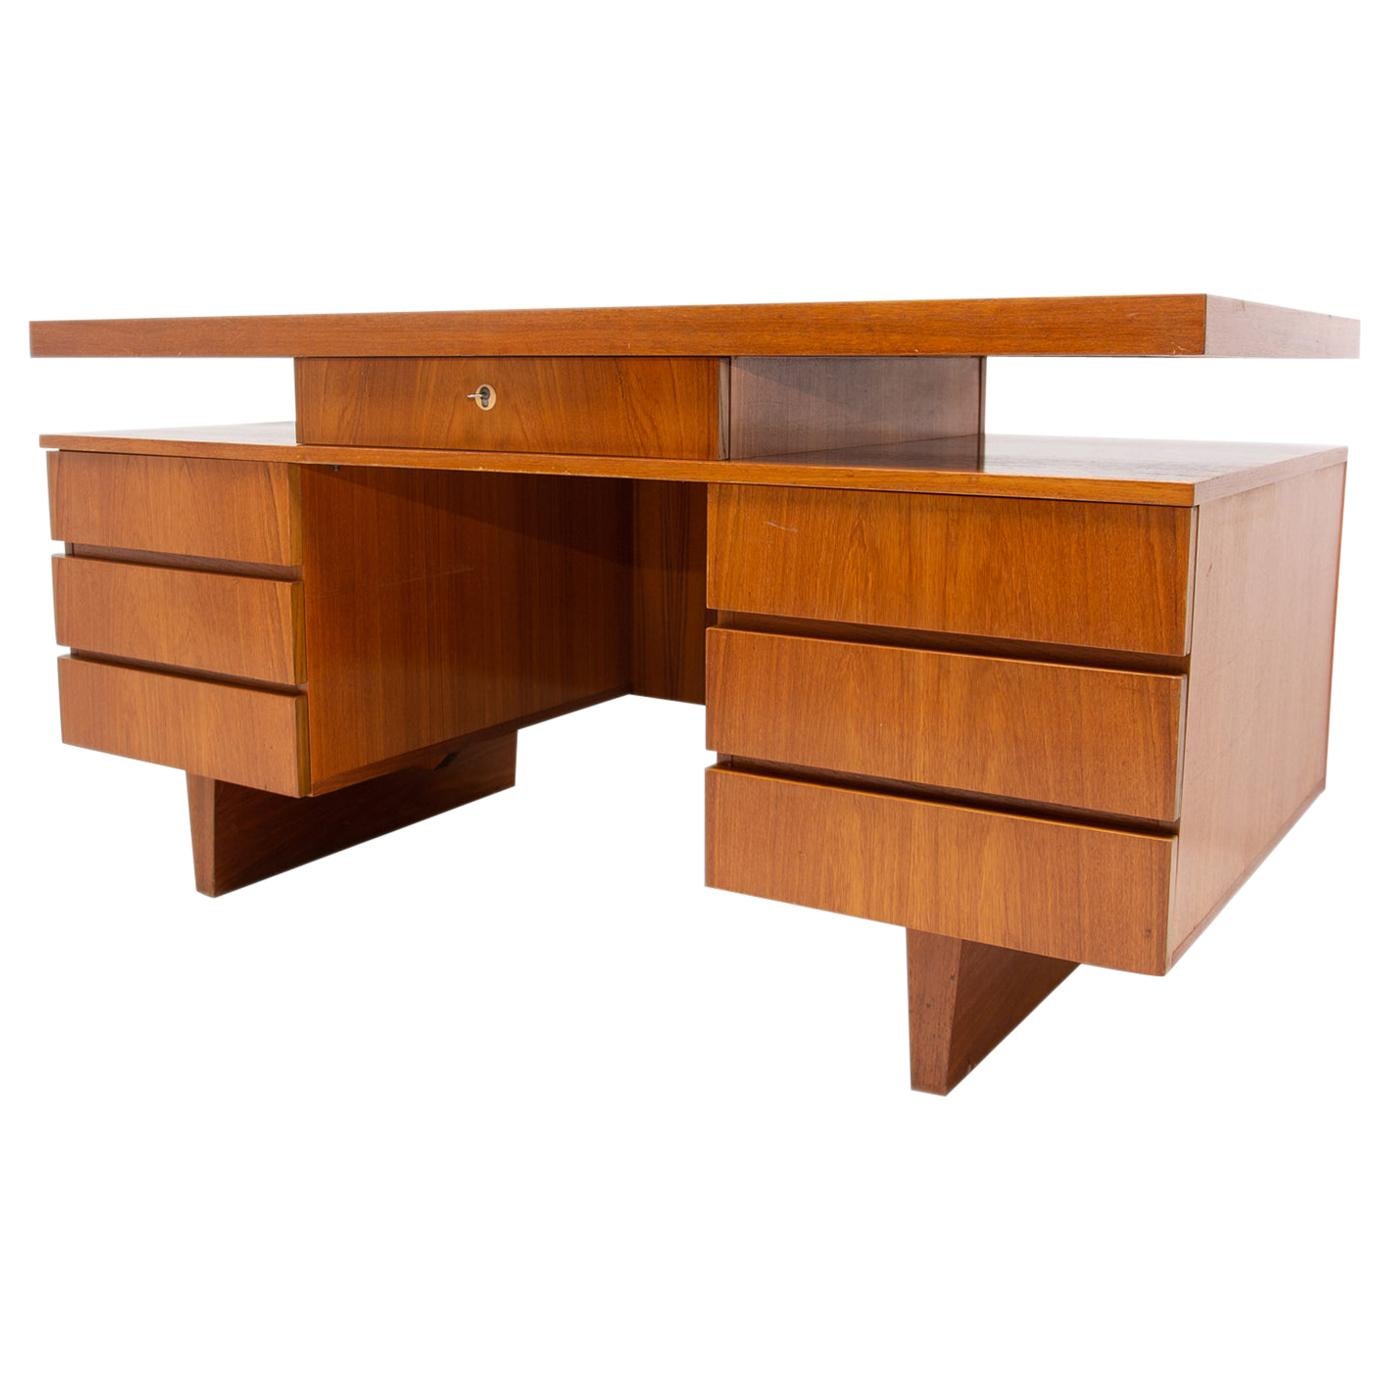 Vintage Writing Desk from Germany, 1970s